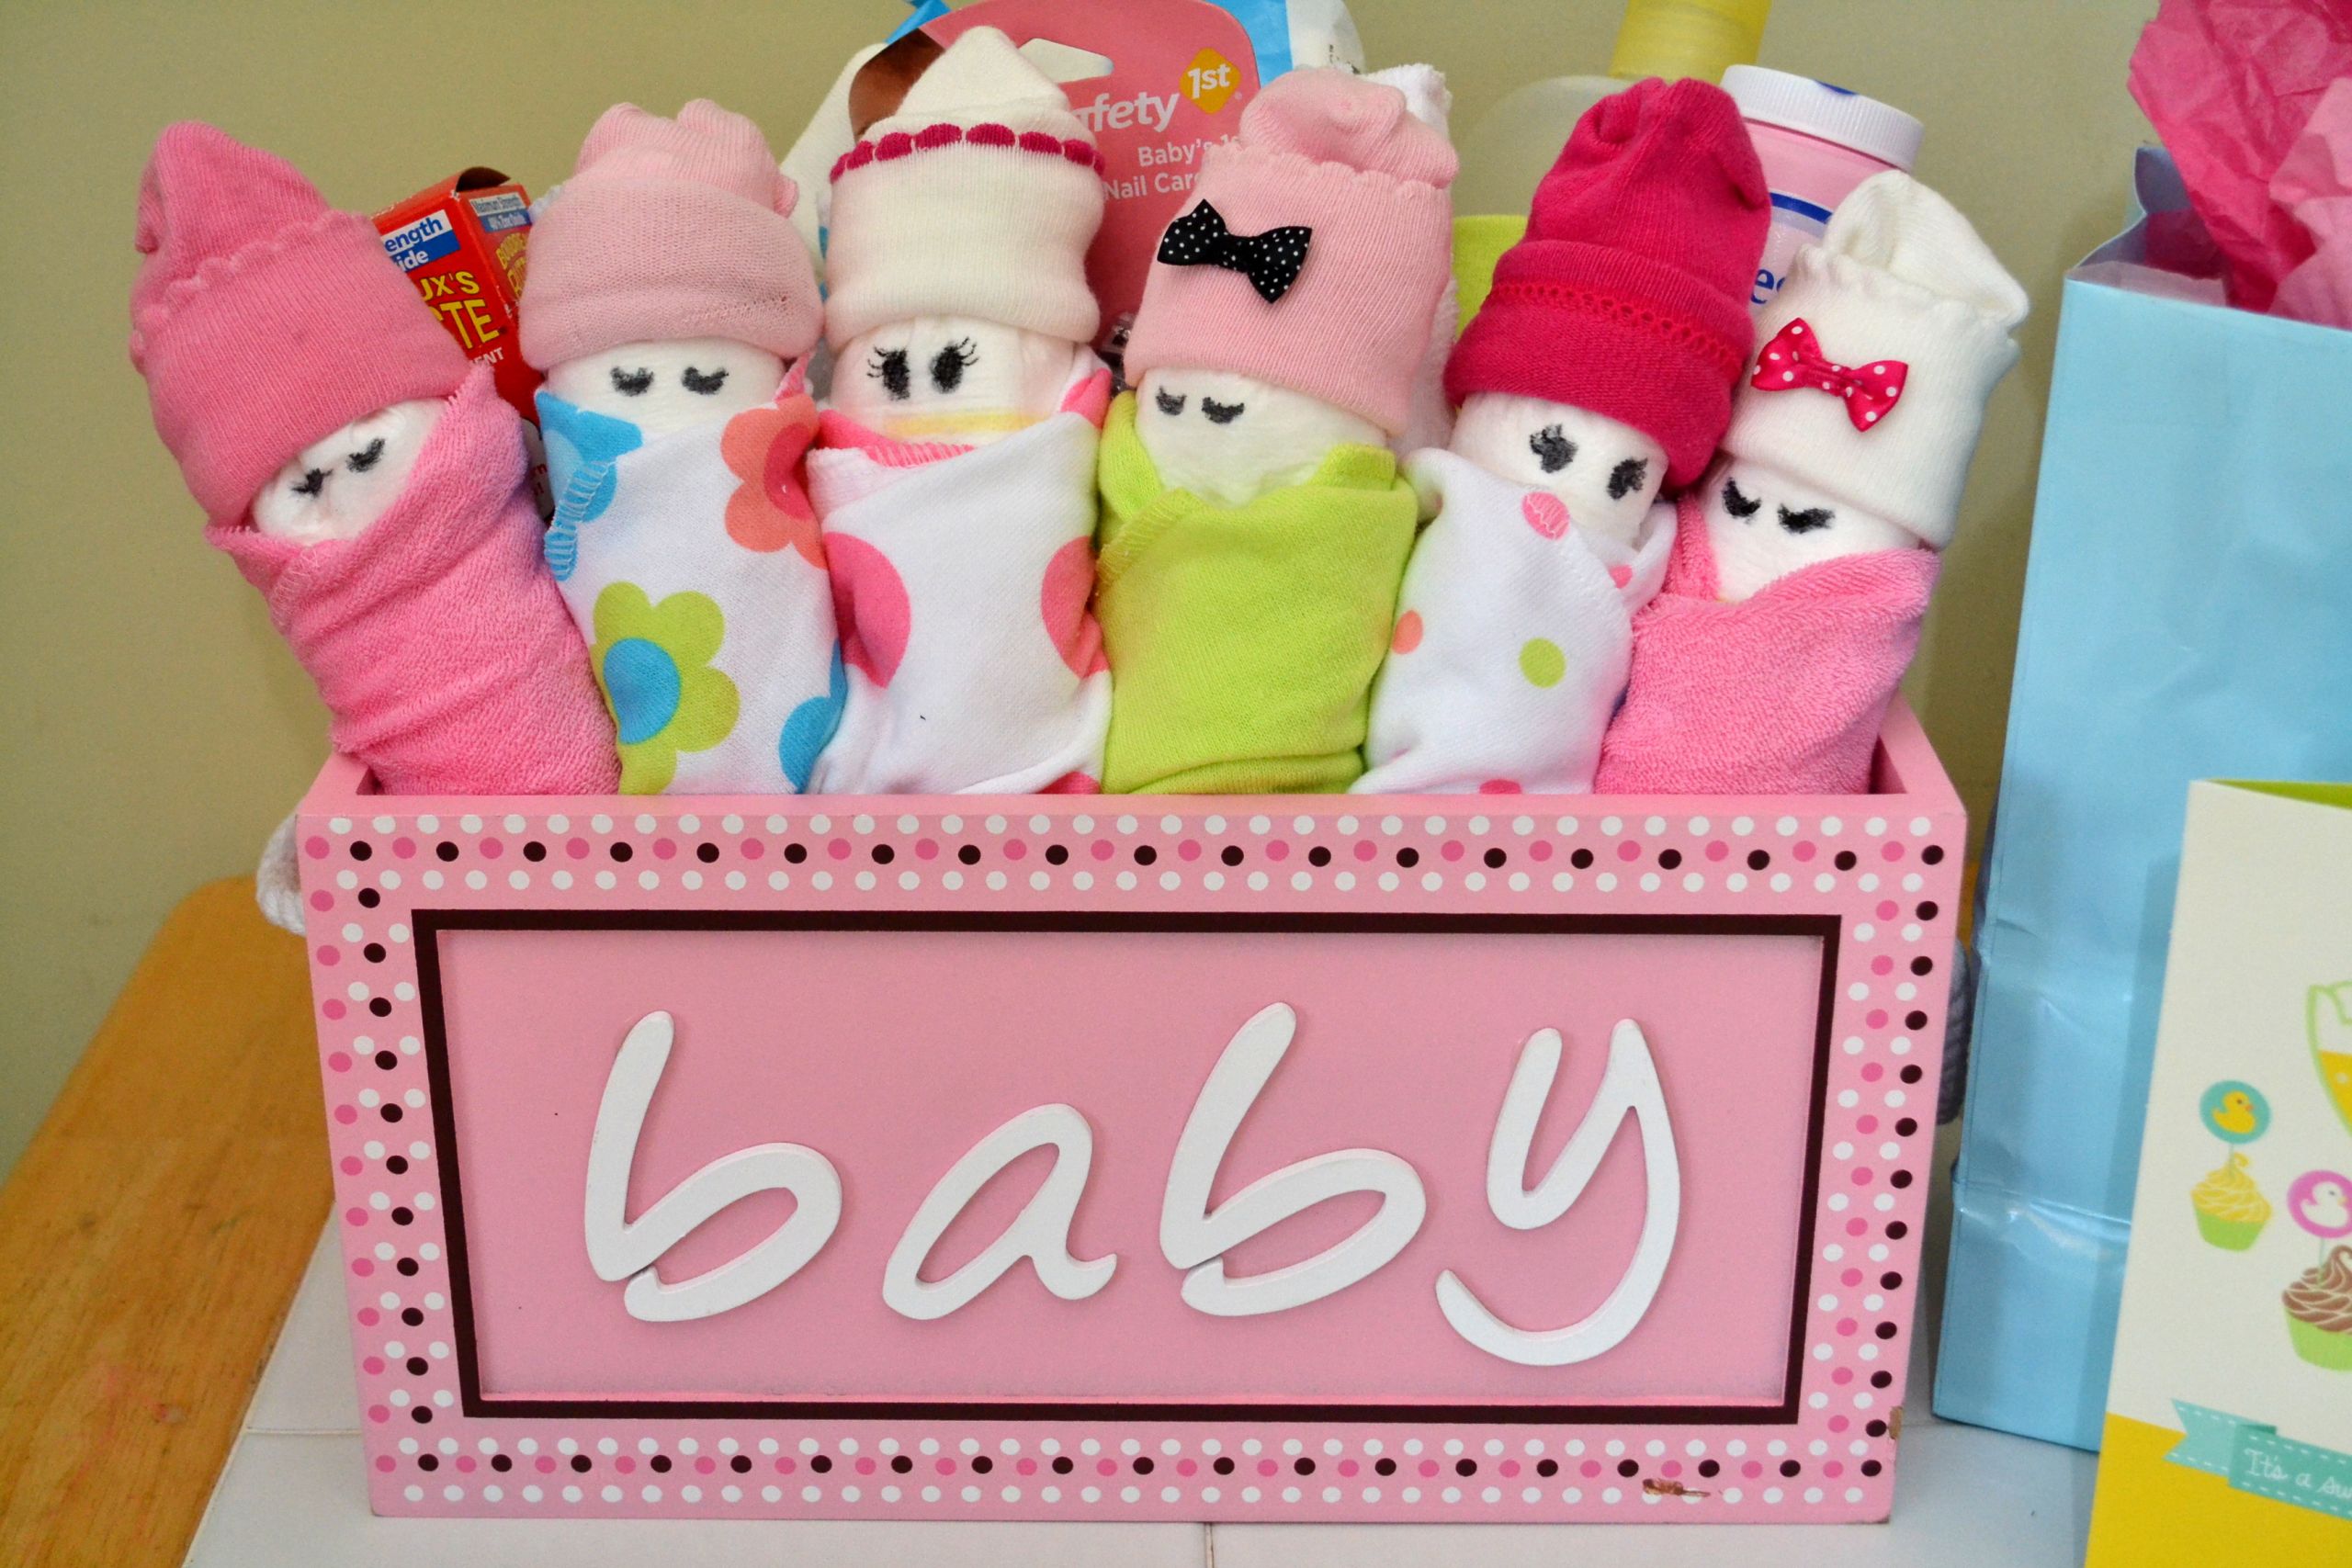 Diaper Gift Ideas For Baby Shower
 Essential Baby Shower Gifts & DIY Diaper Babies